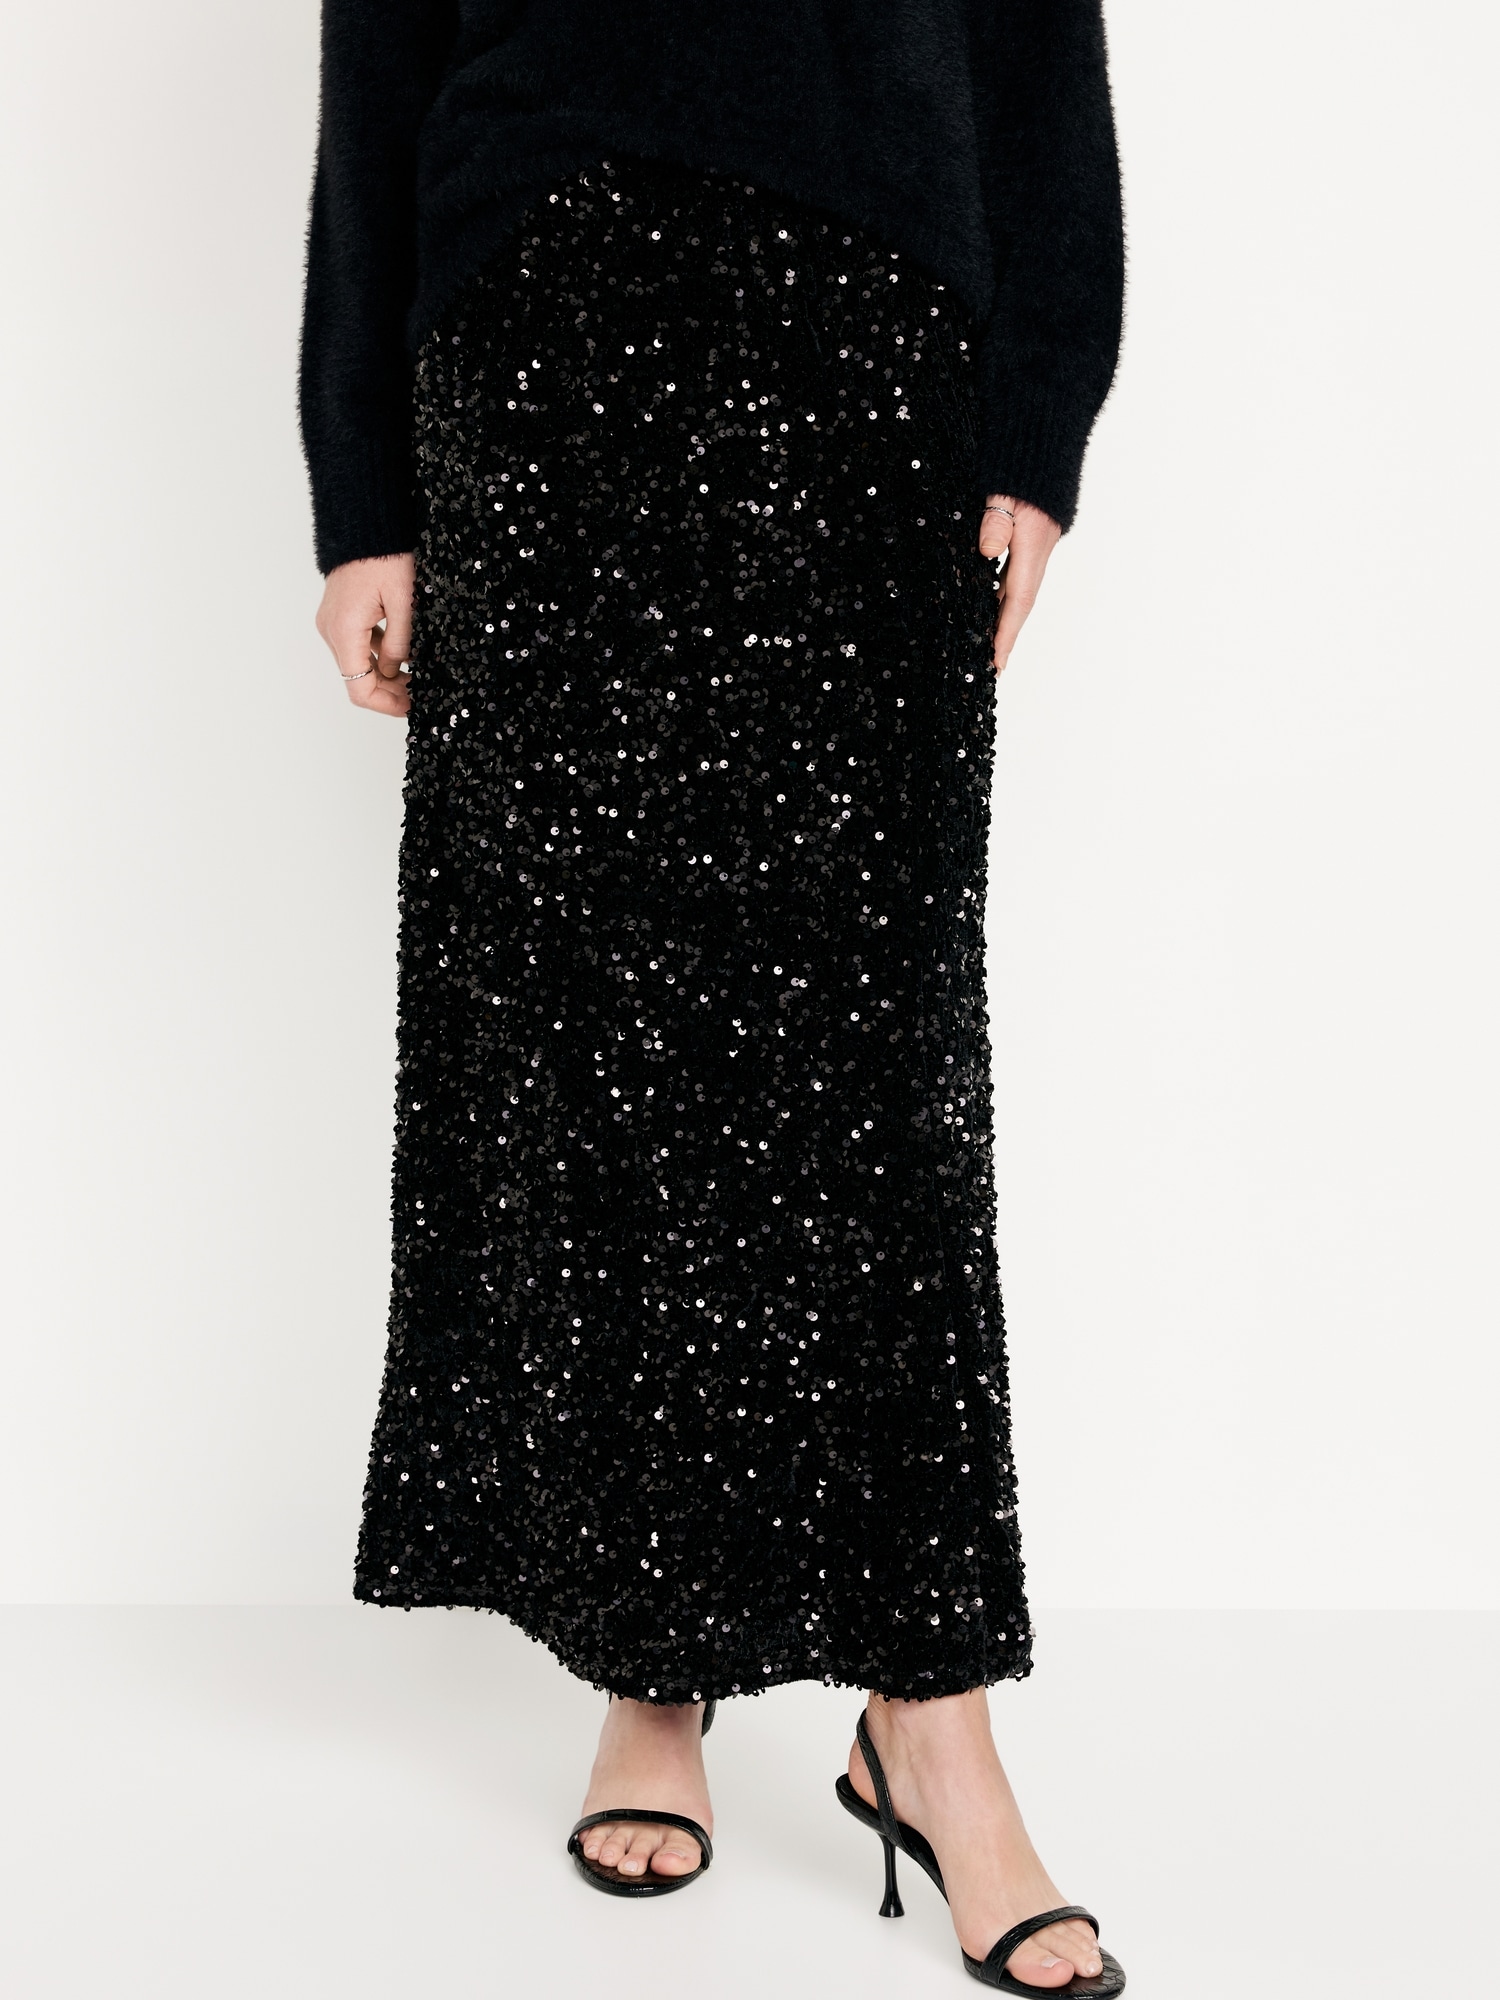 Sequin A-Line Maxi Skirt | Old Navy